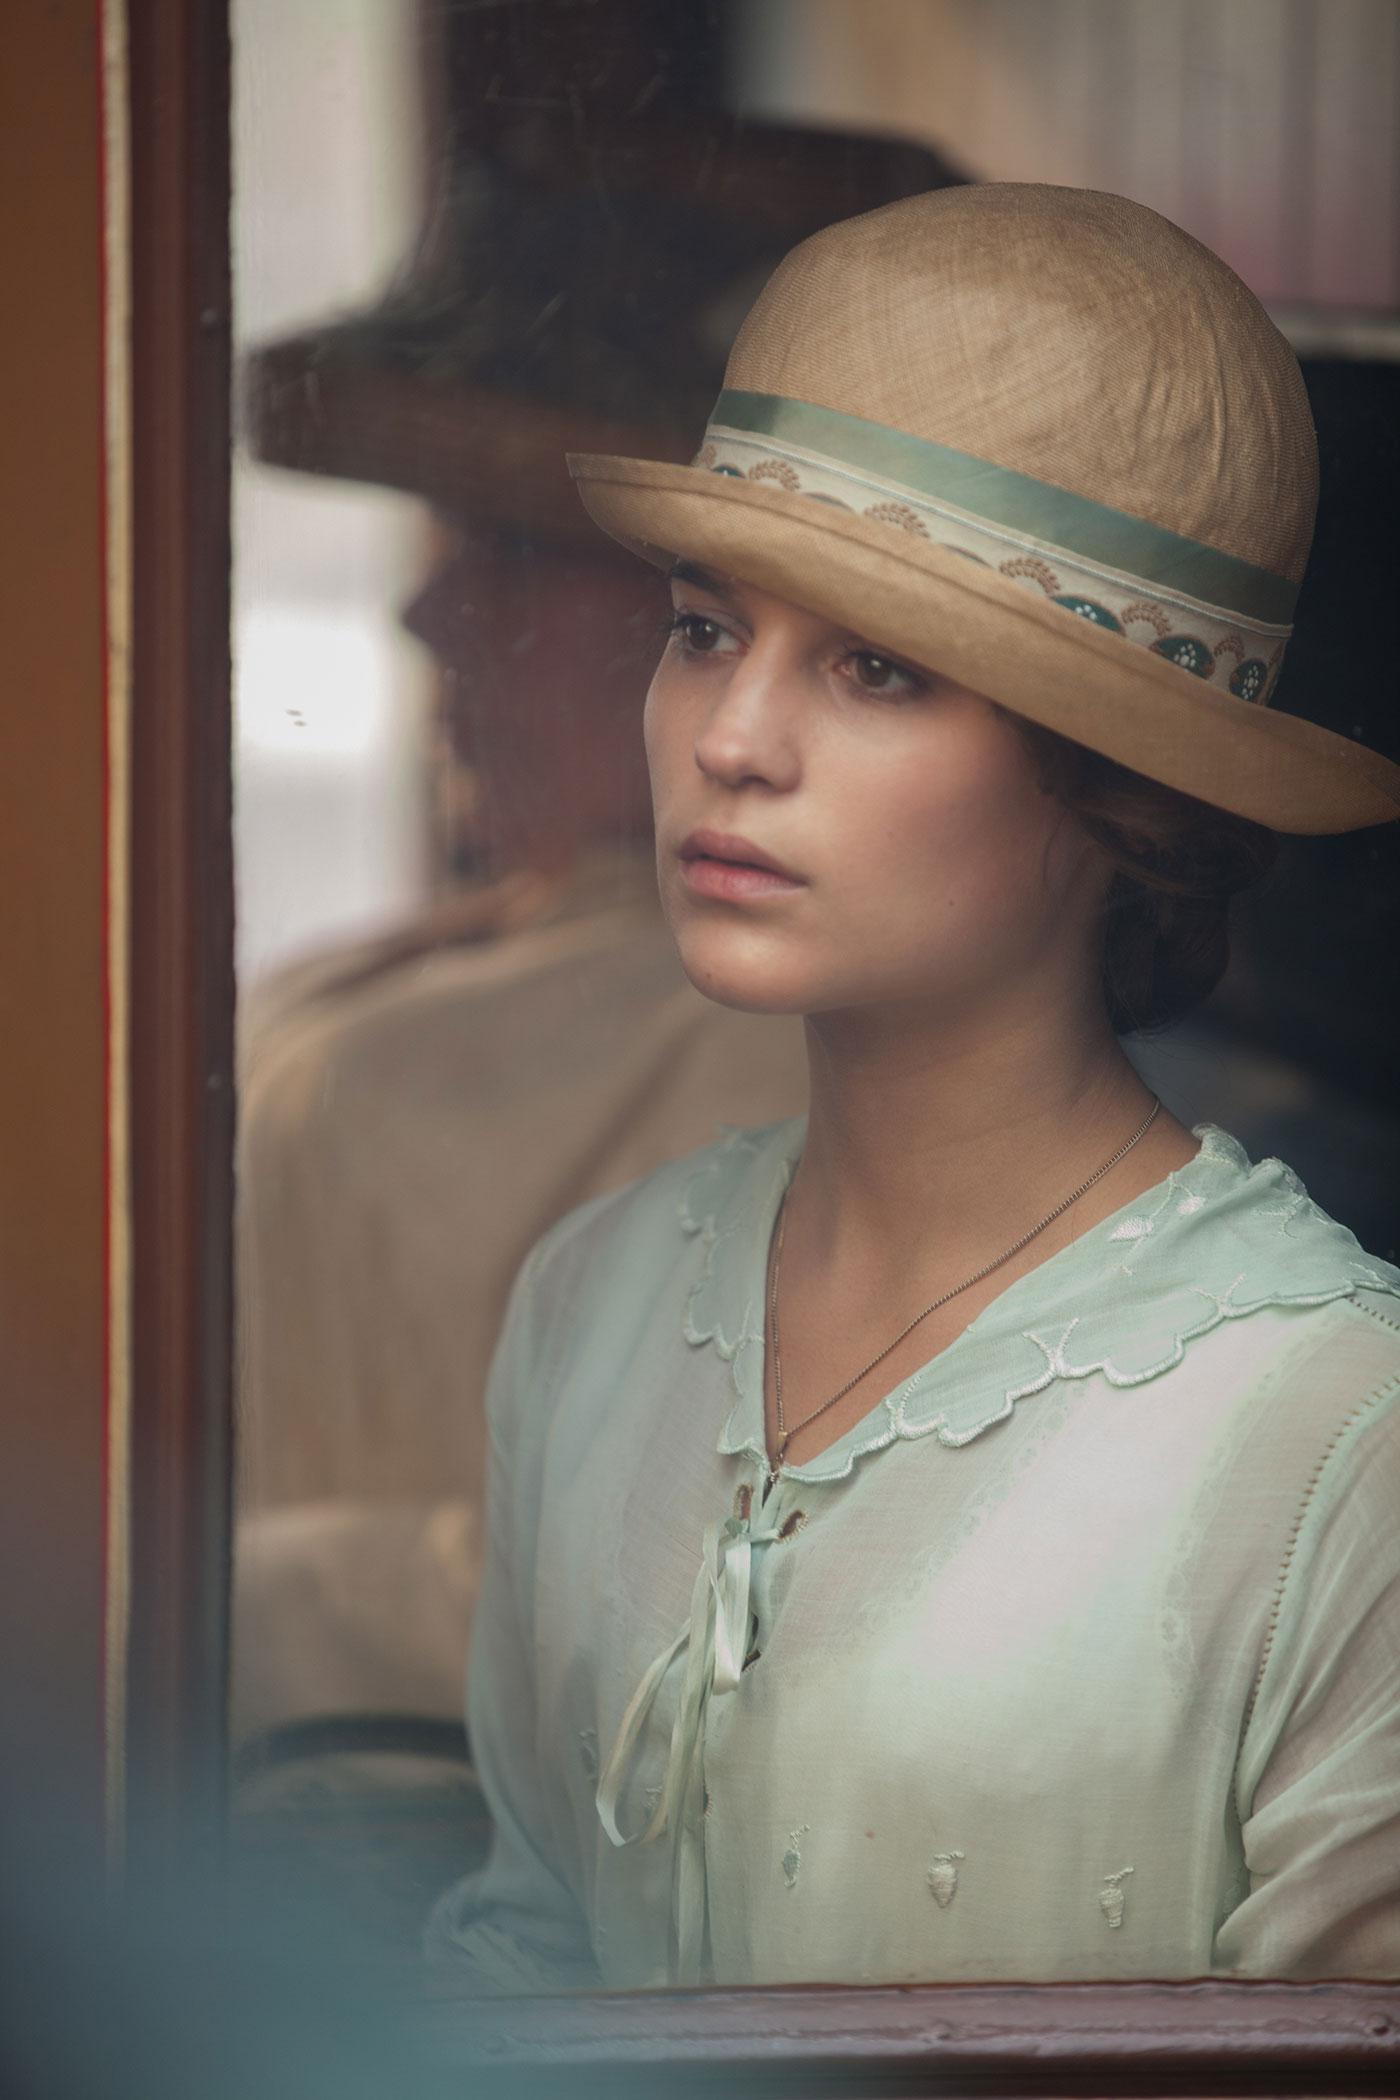 ”The testament of youth”.